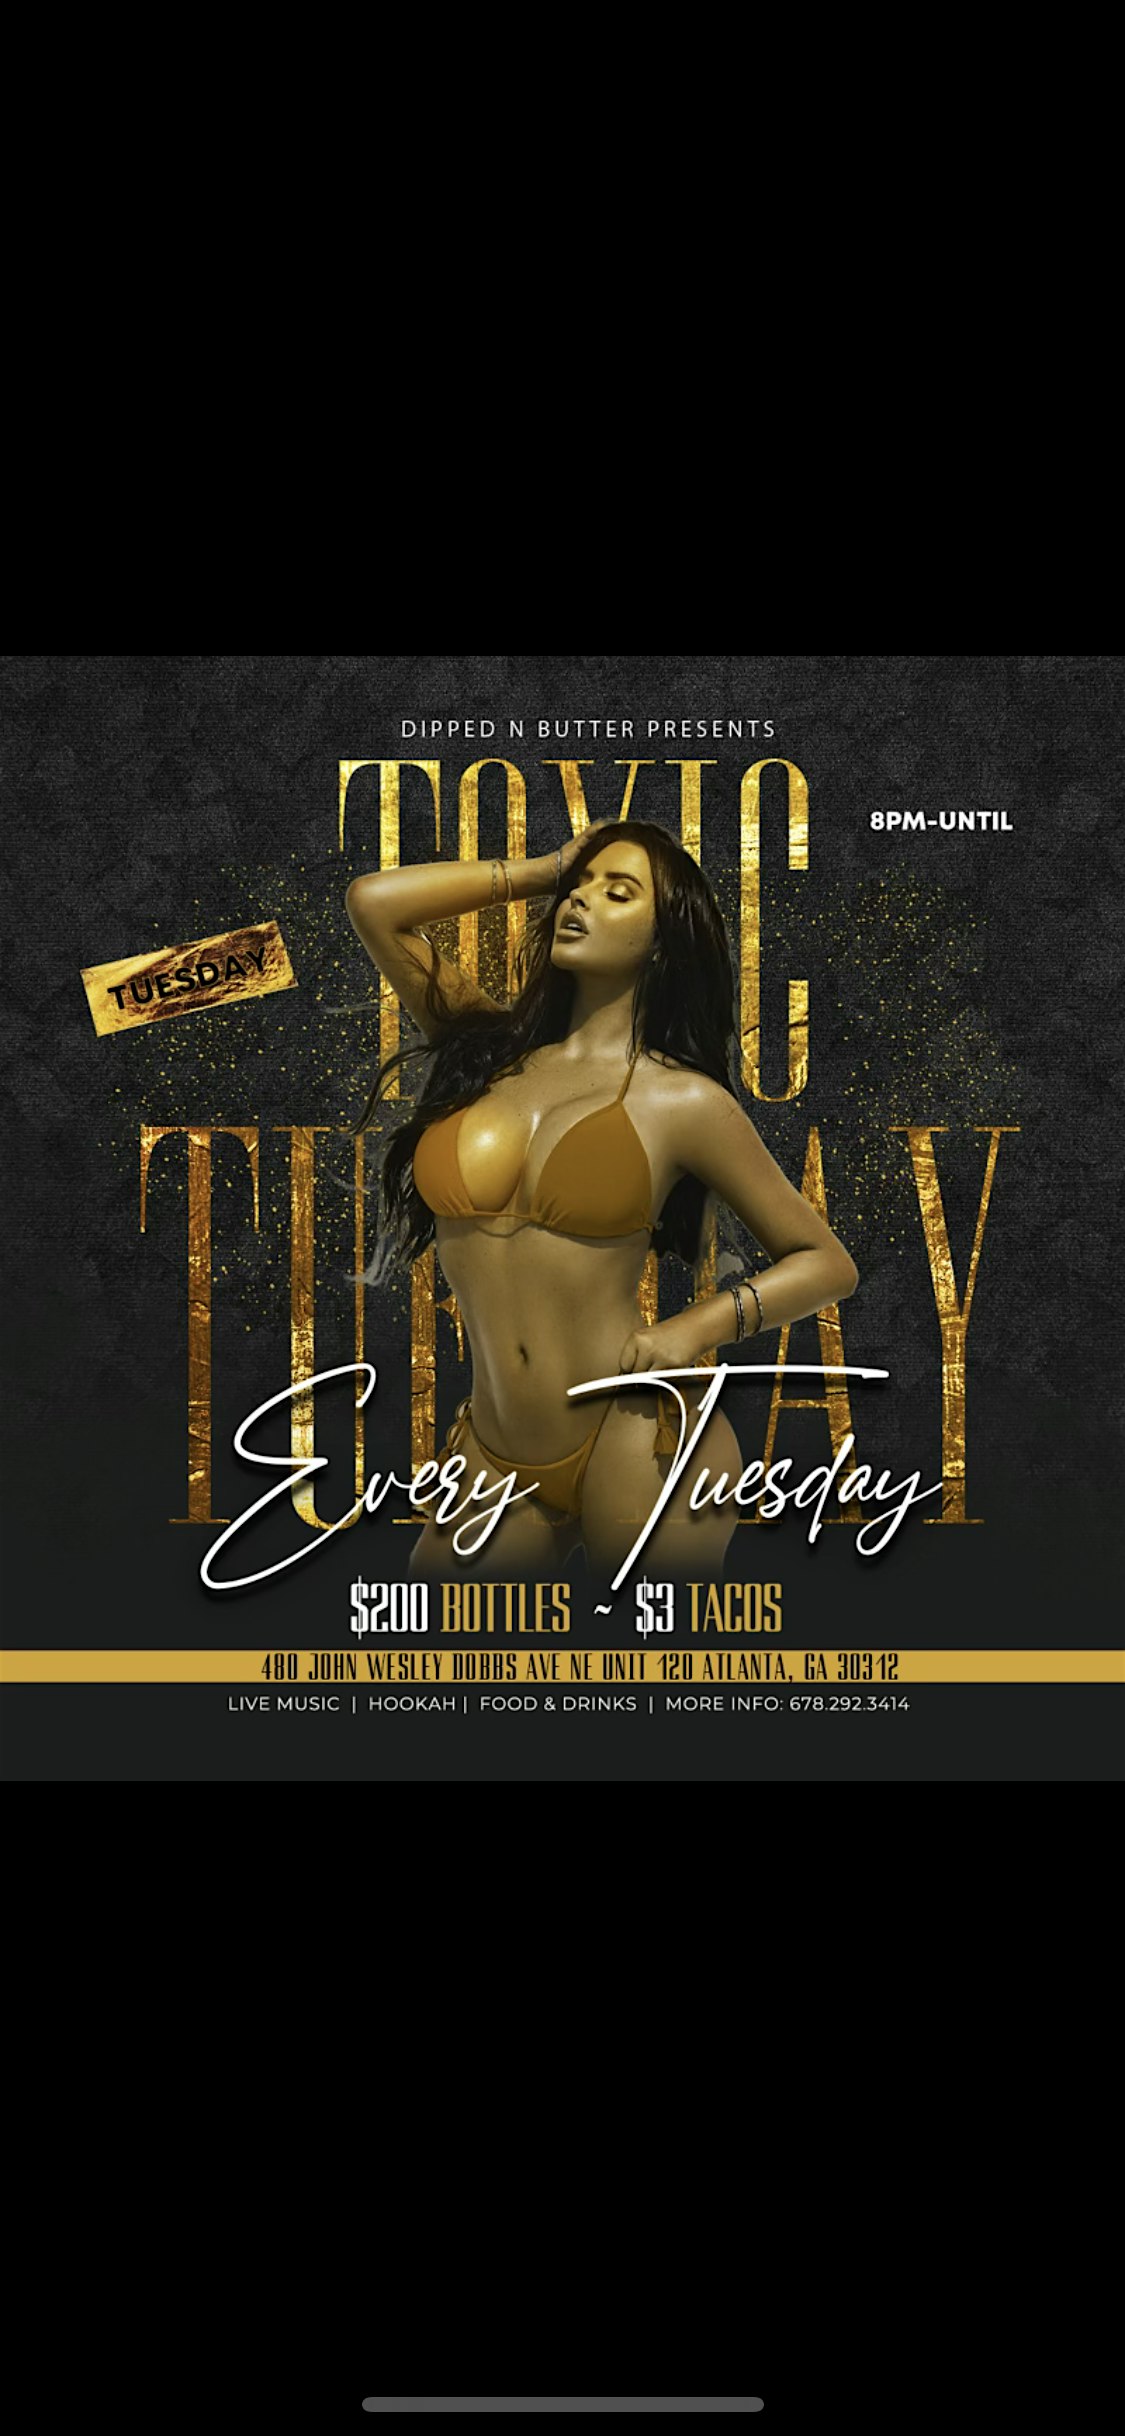 Toxic Tuesdays at Dipped N Butter